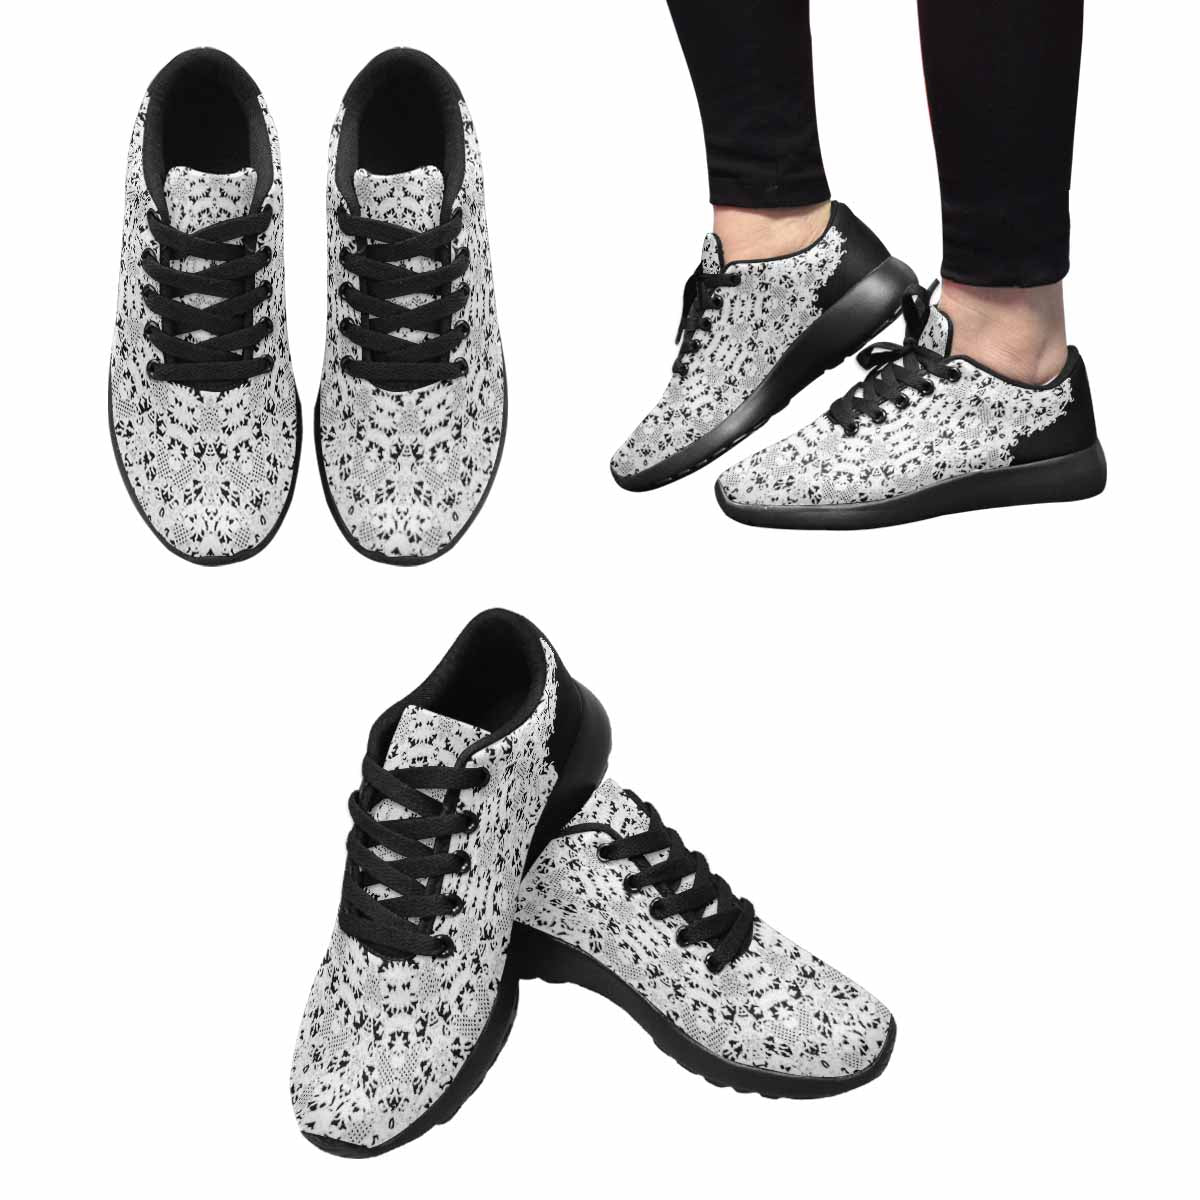 Victorian lace print, womens cute casual or running sneakers, design 50